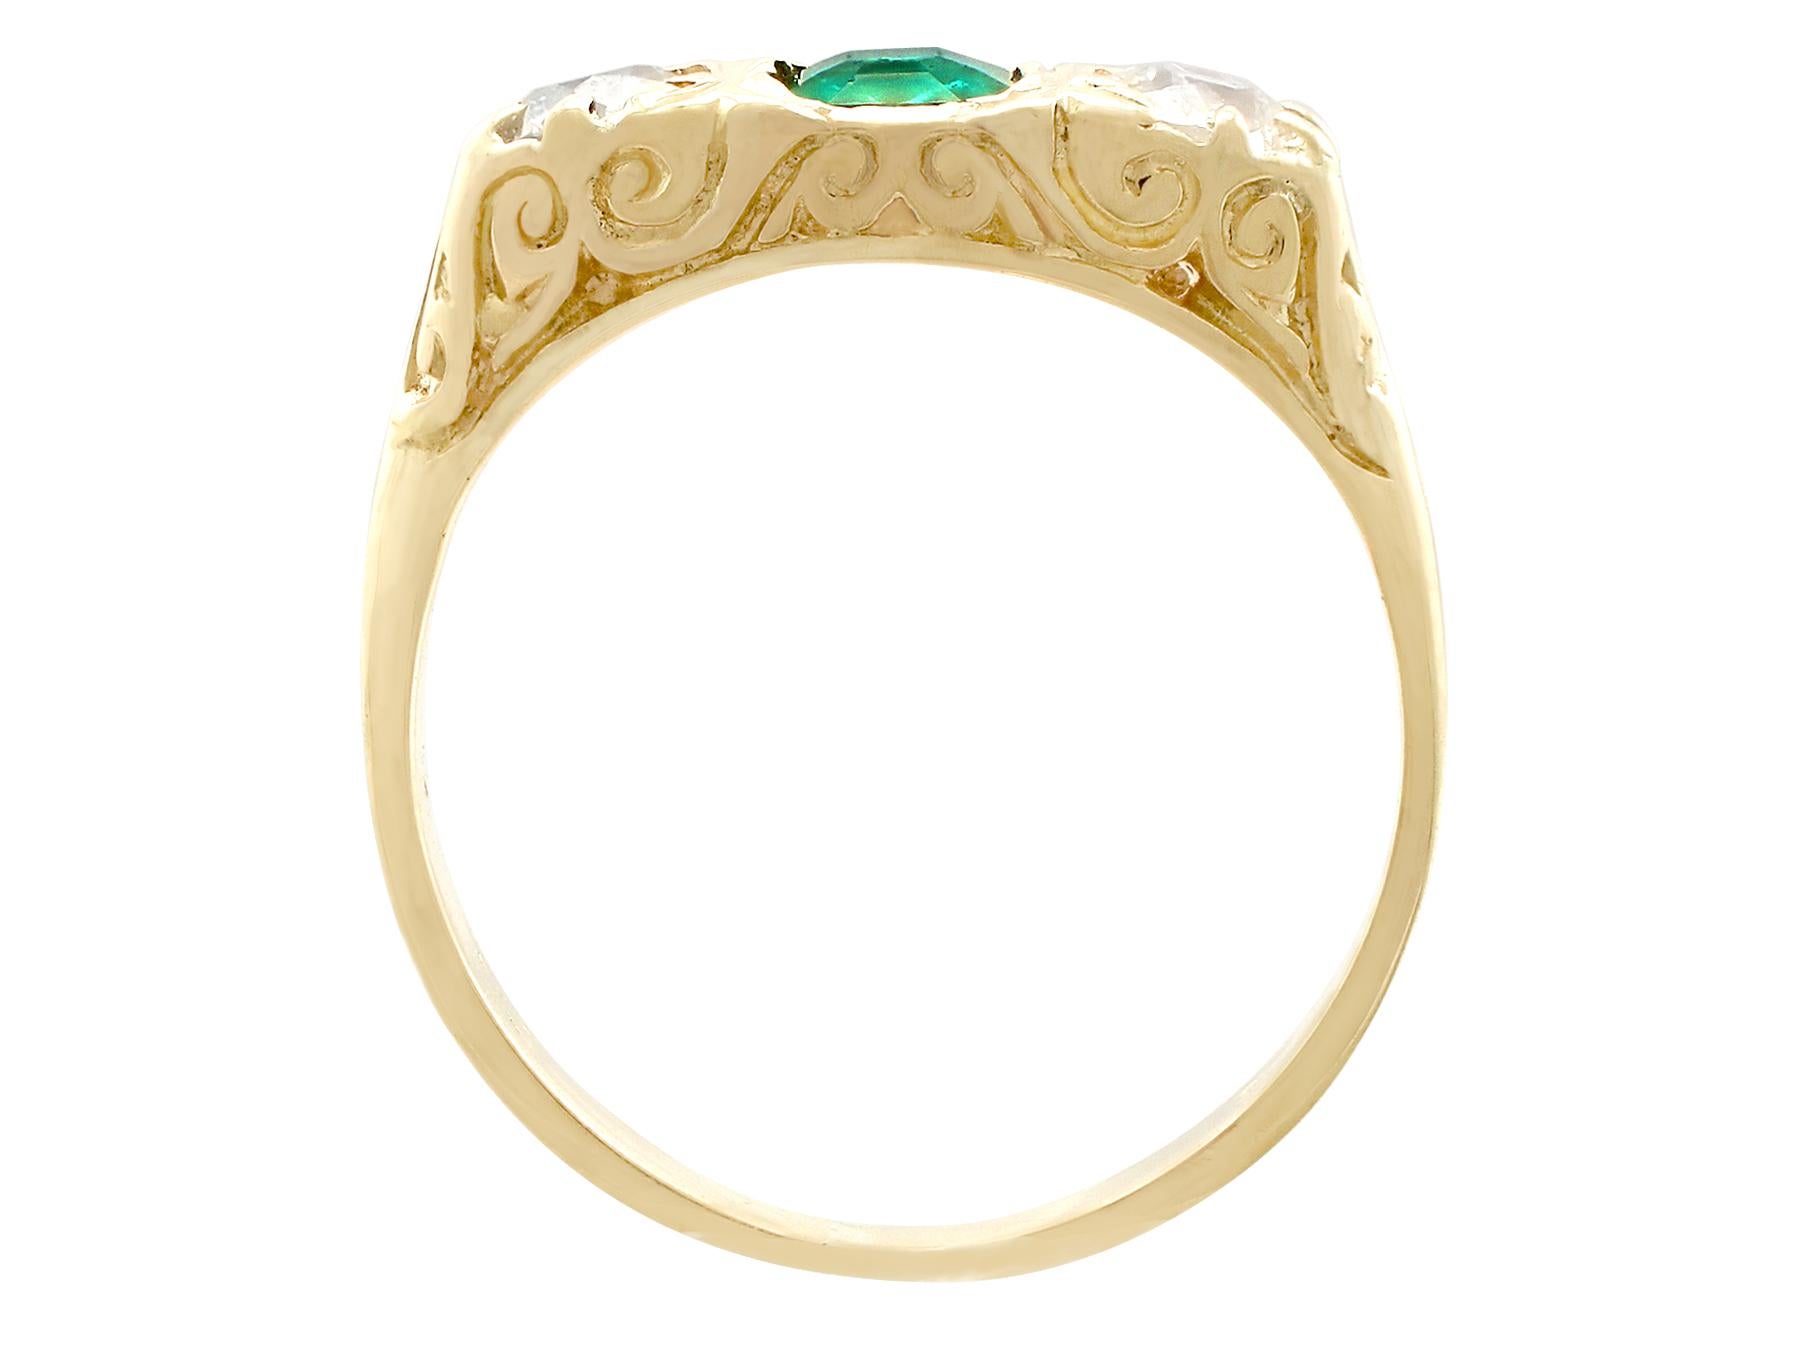 1910s Antique Emerald Diamond Yellow Gold Cocktail Ring In Excellent Condition For Sale In Jesmond, Newcastle Upon Tyne